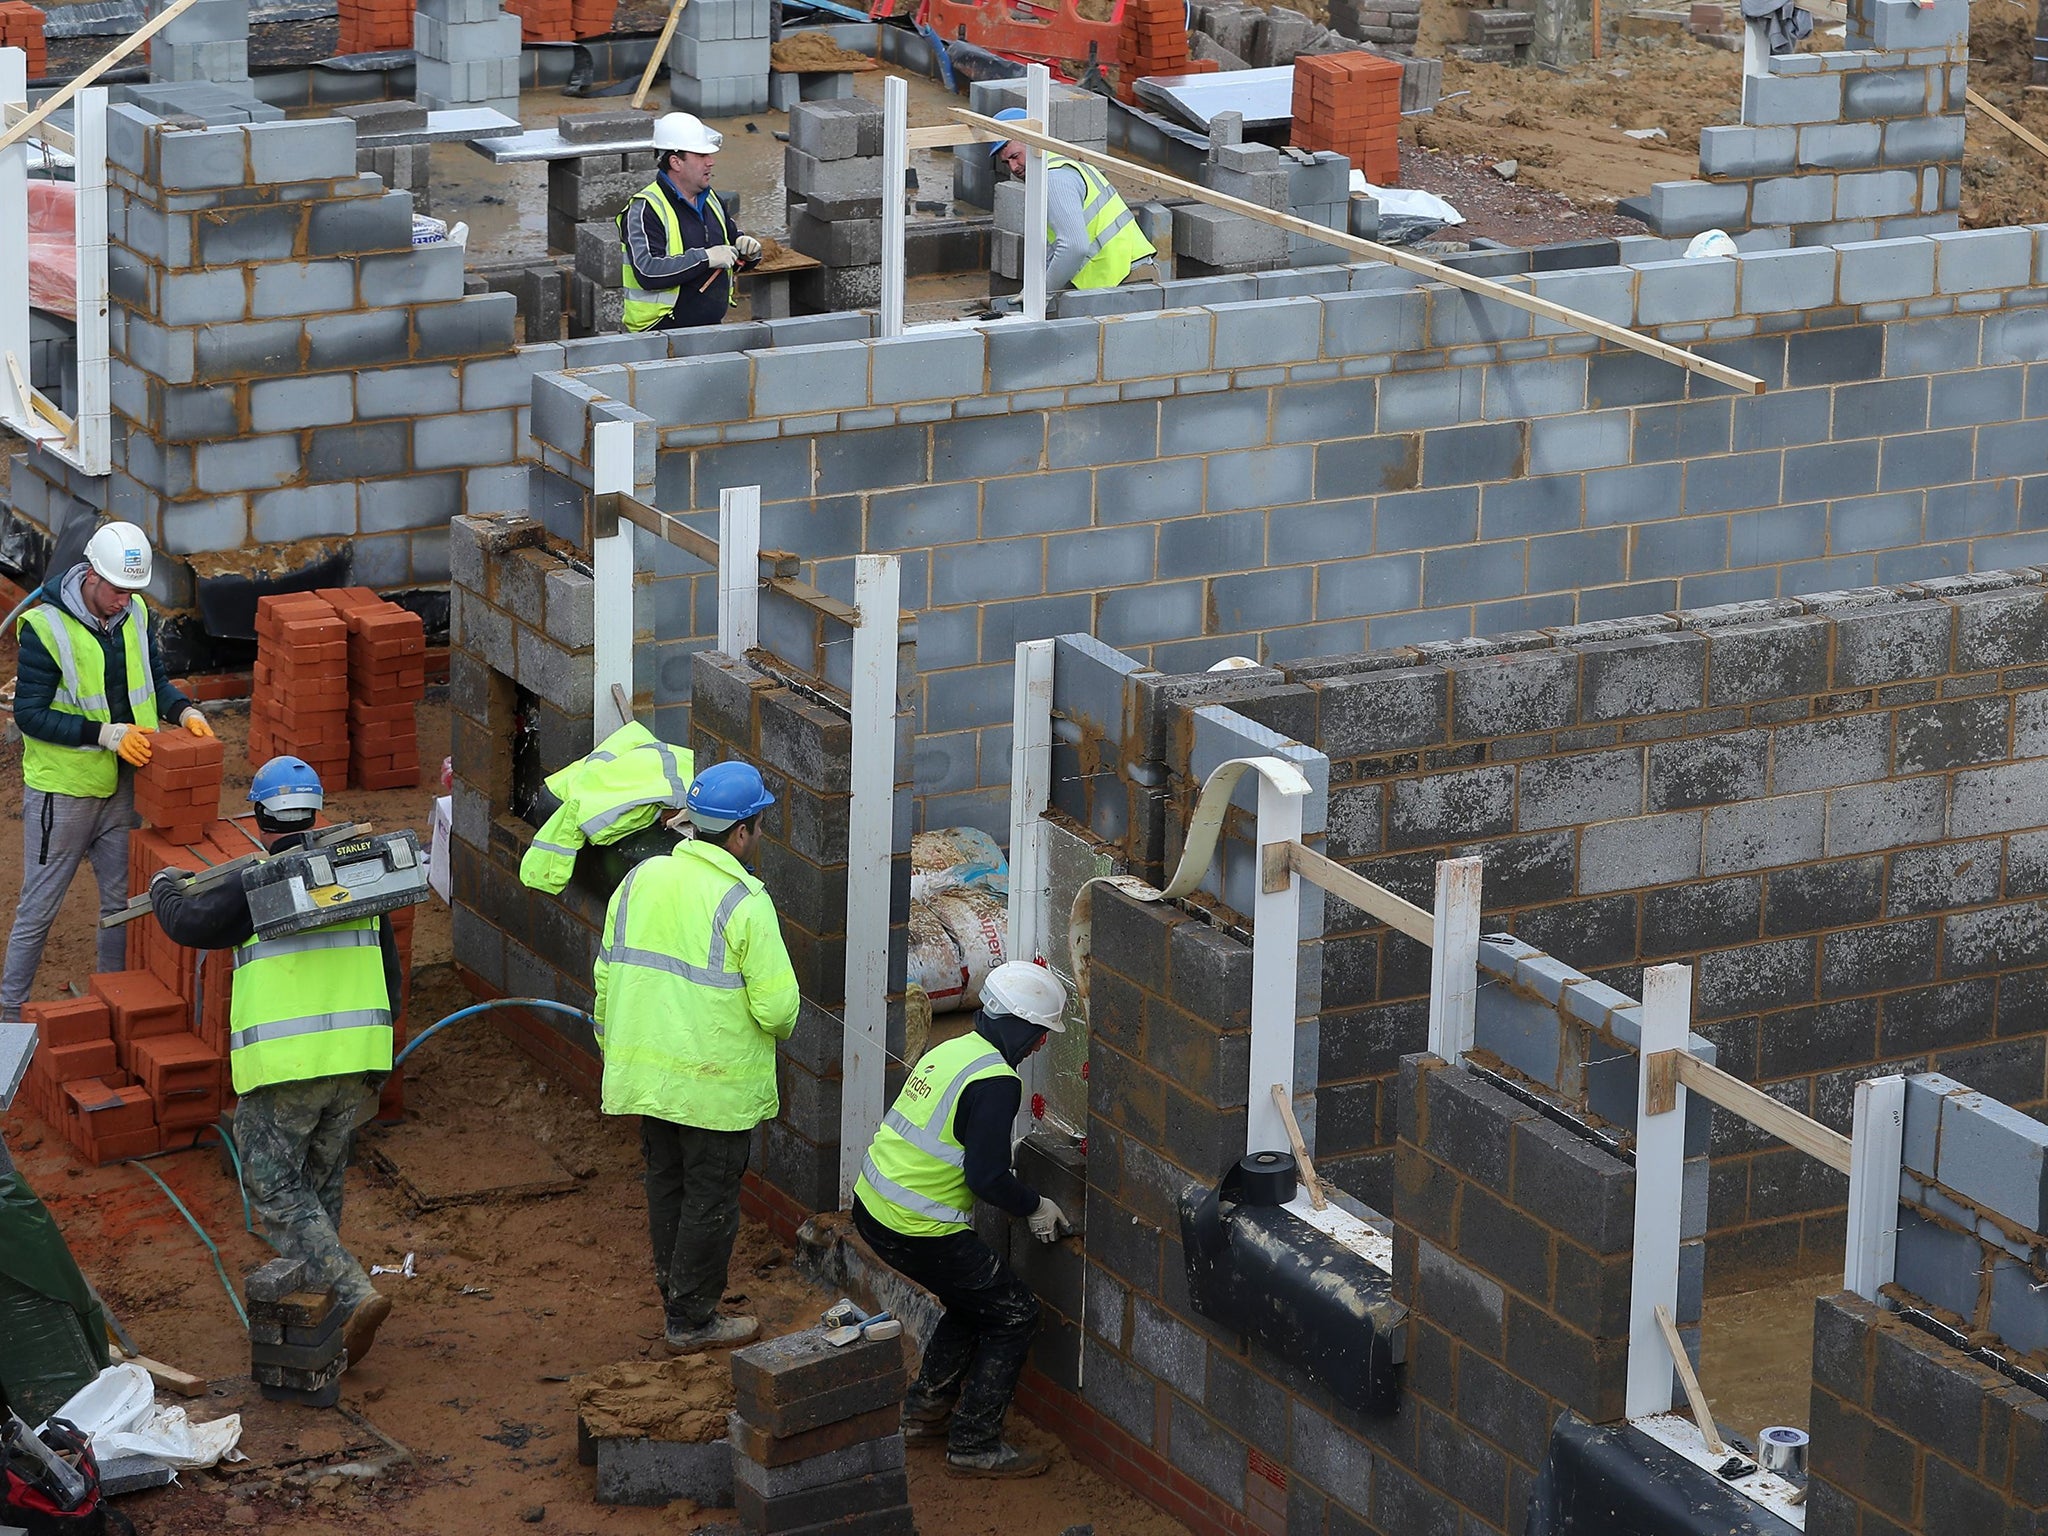 Construction is one sector predicted to experience a particularly severe shortage of skilled workers